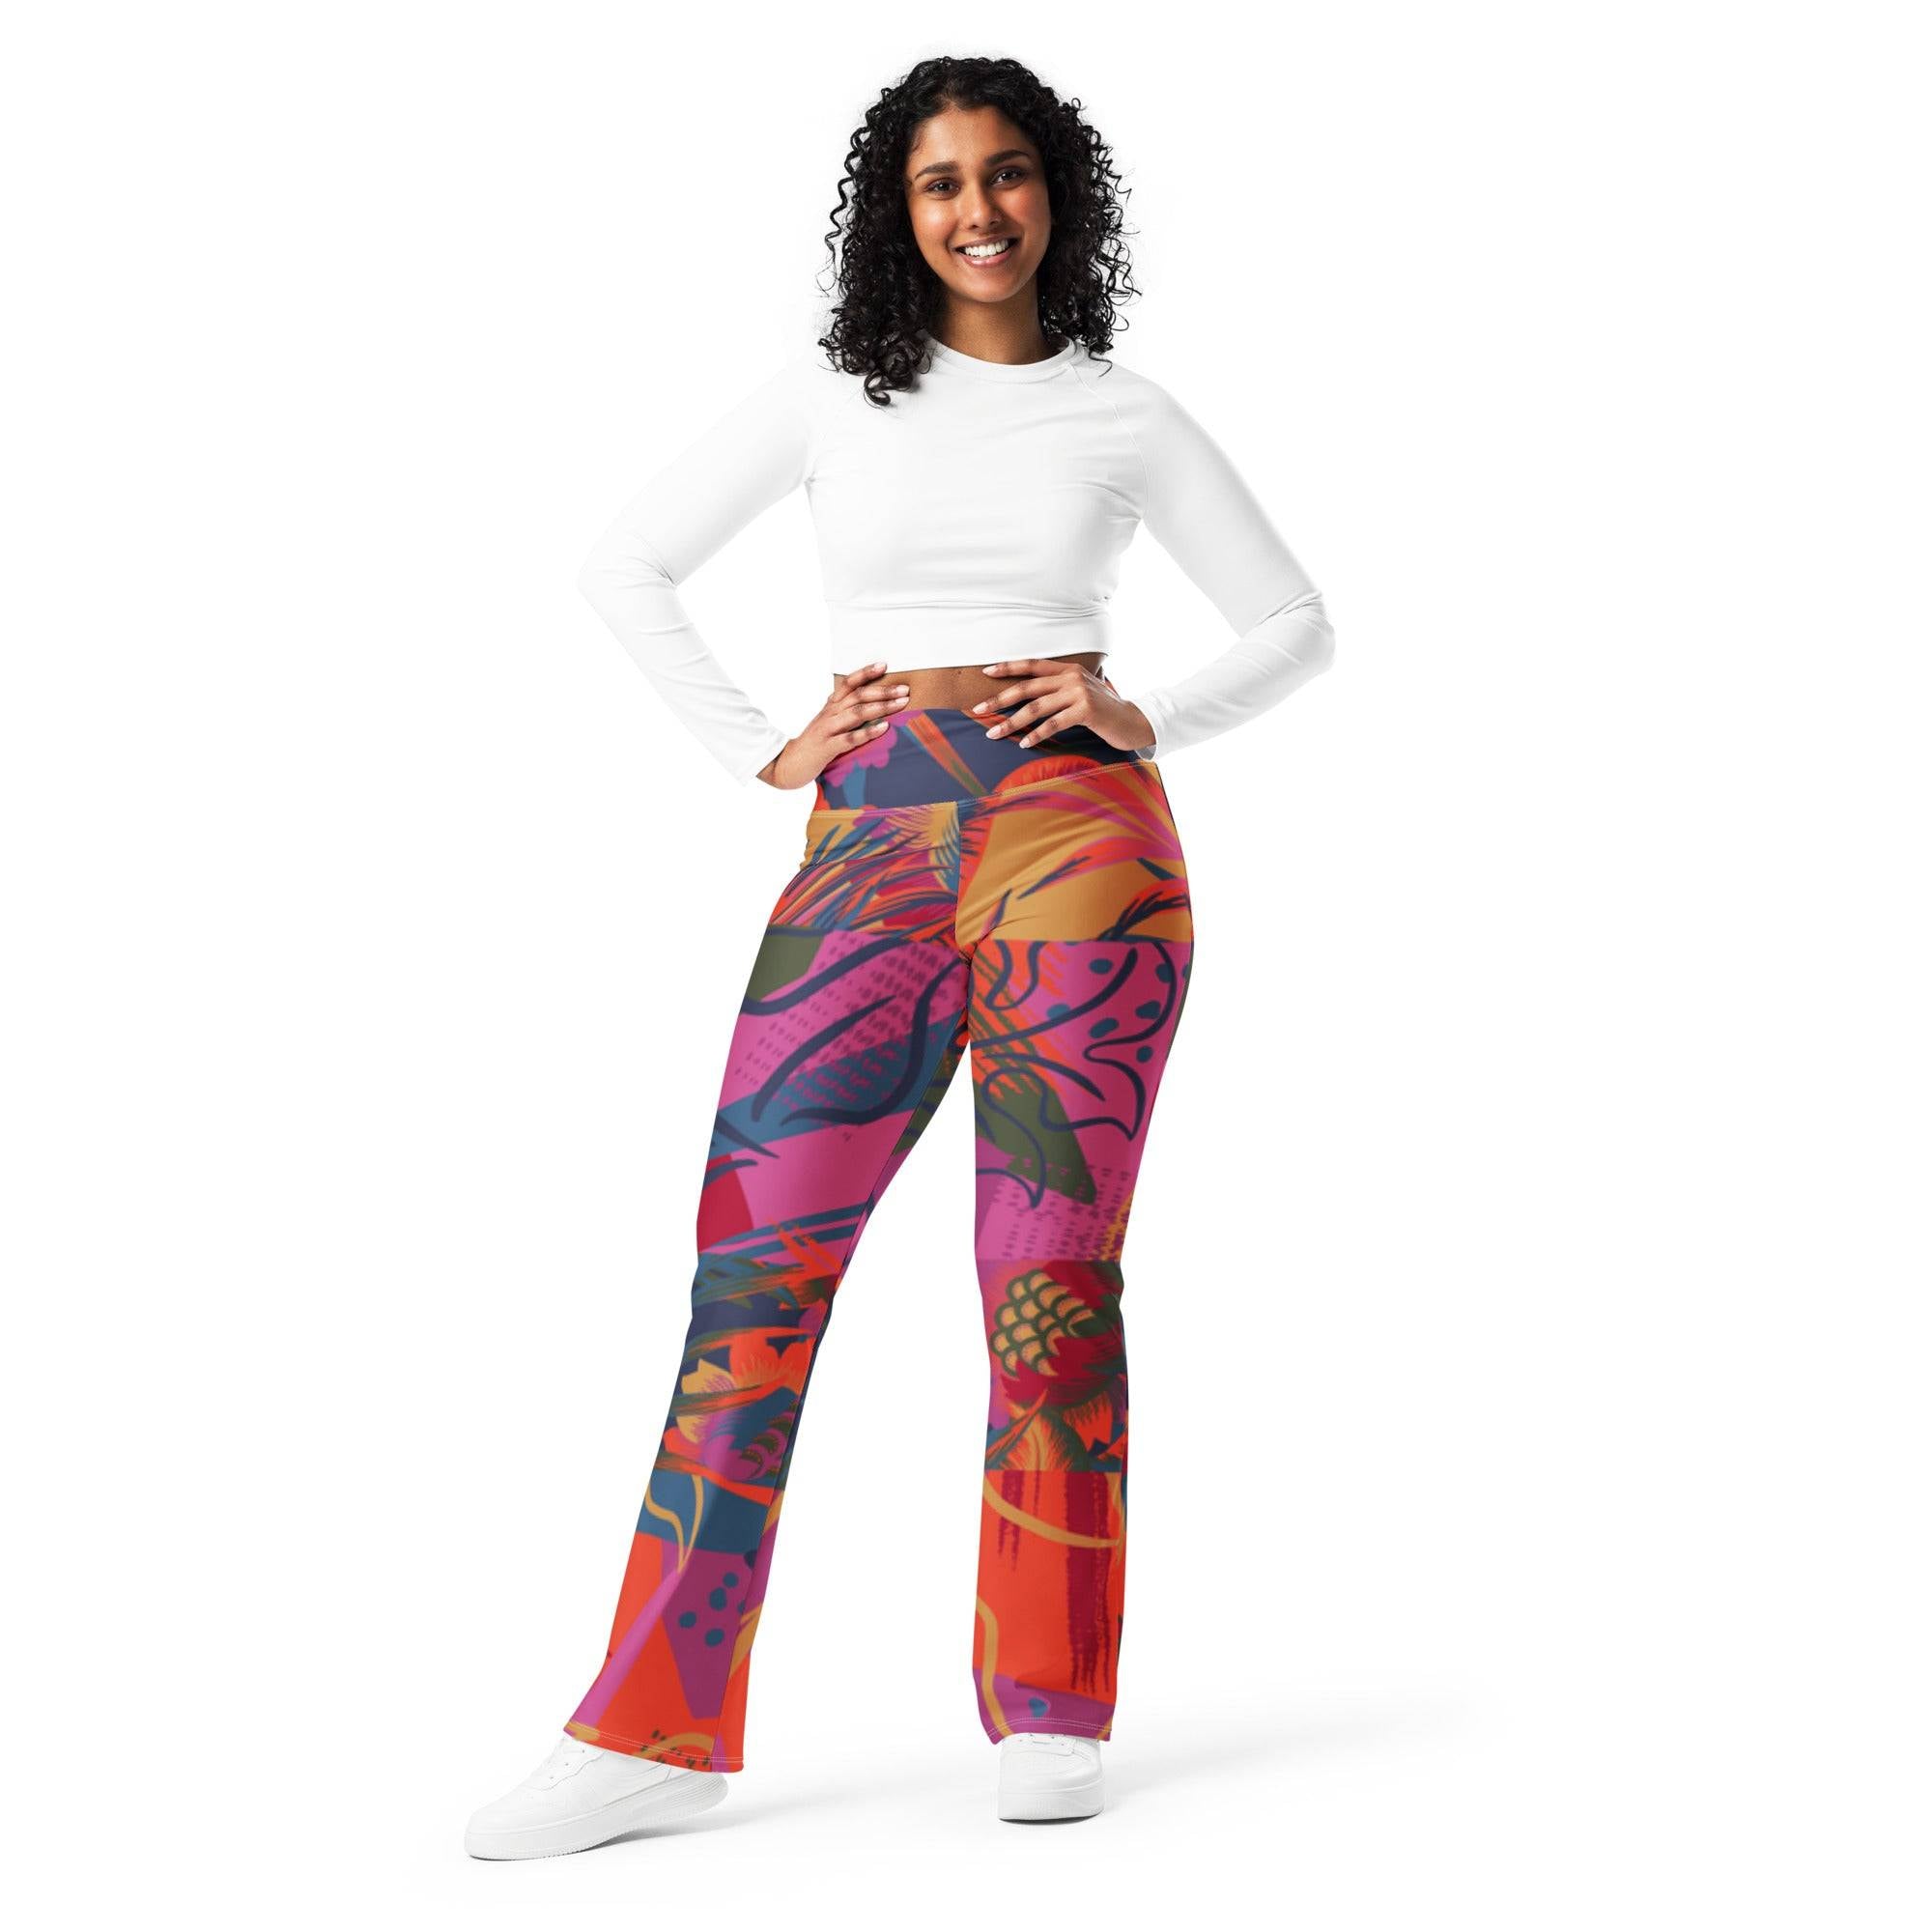 Flare Patterned Leggings by Revive Wear Australia.   These patterned flare leggings feature a high waist and back pocket. Enhance your curves in all the right places with this trendsetting flare cut.  Explore today.